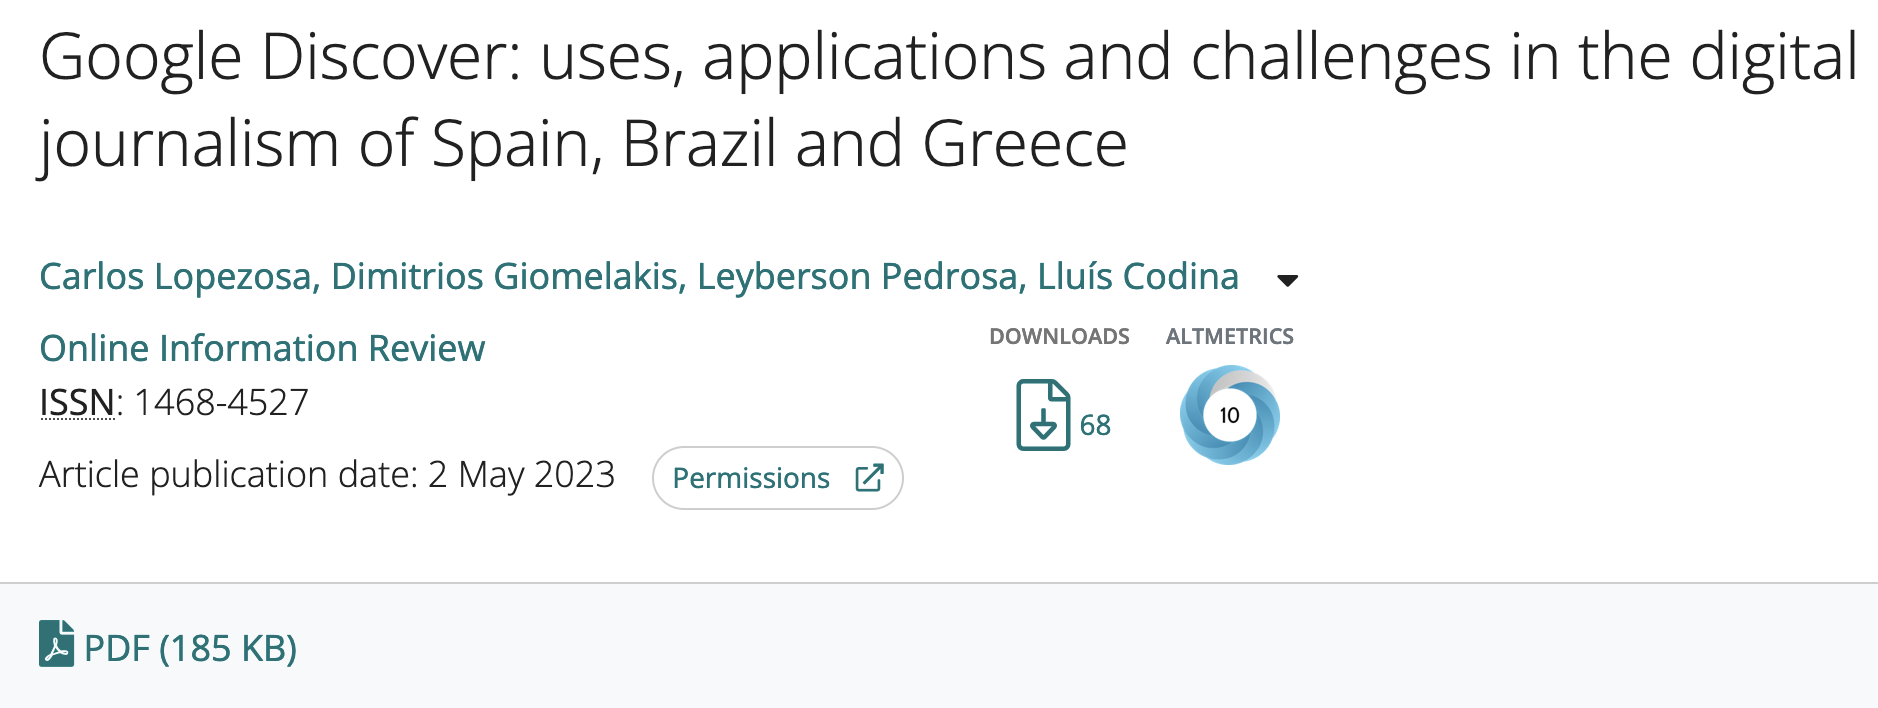 Google Discover: uses, applications and challenges in the digital journalism of Spain, Brazil and Greece [article]